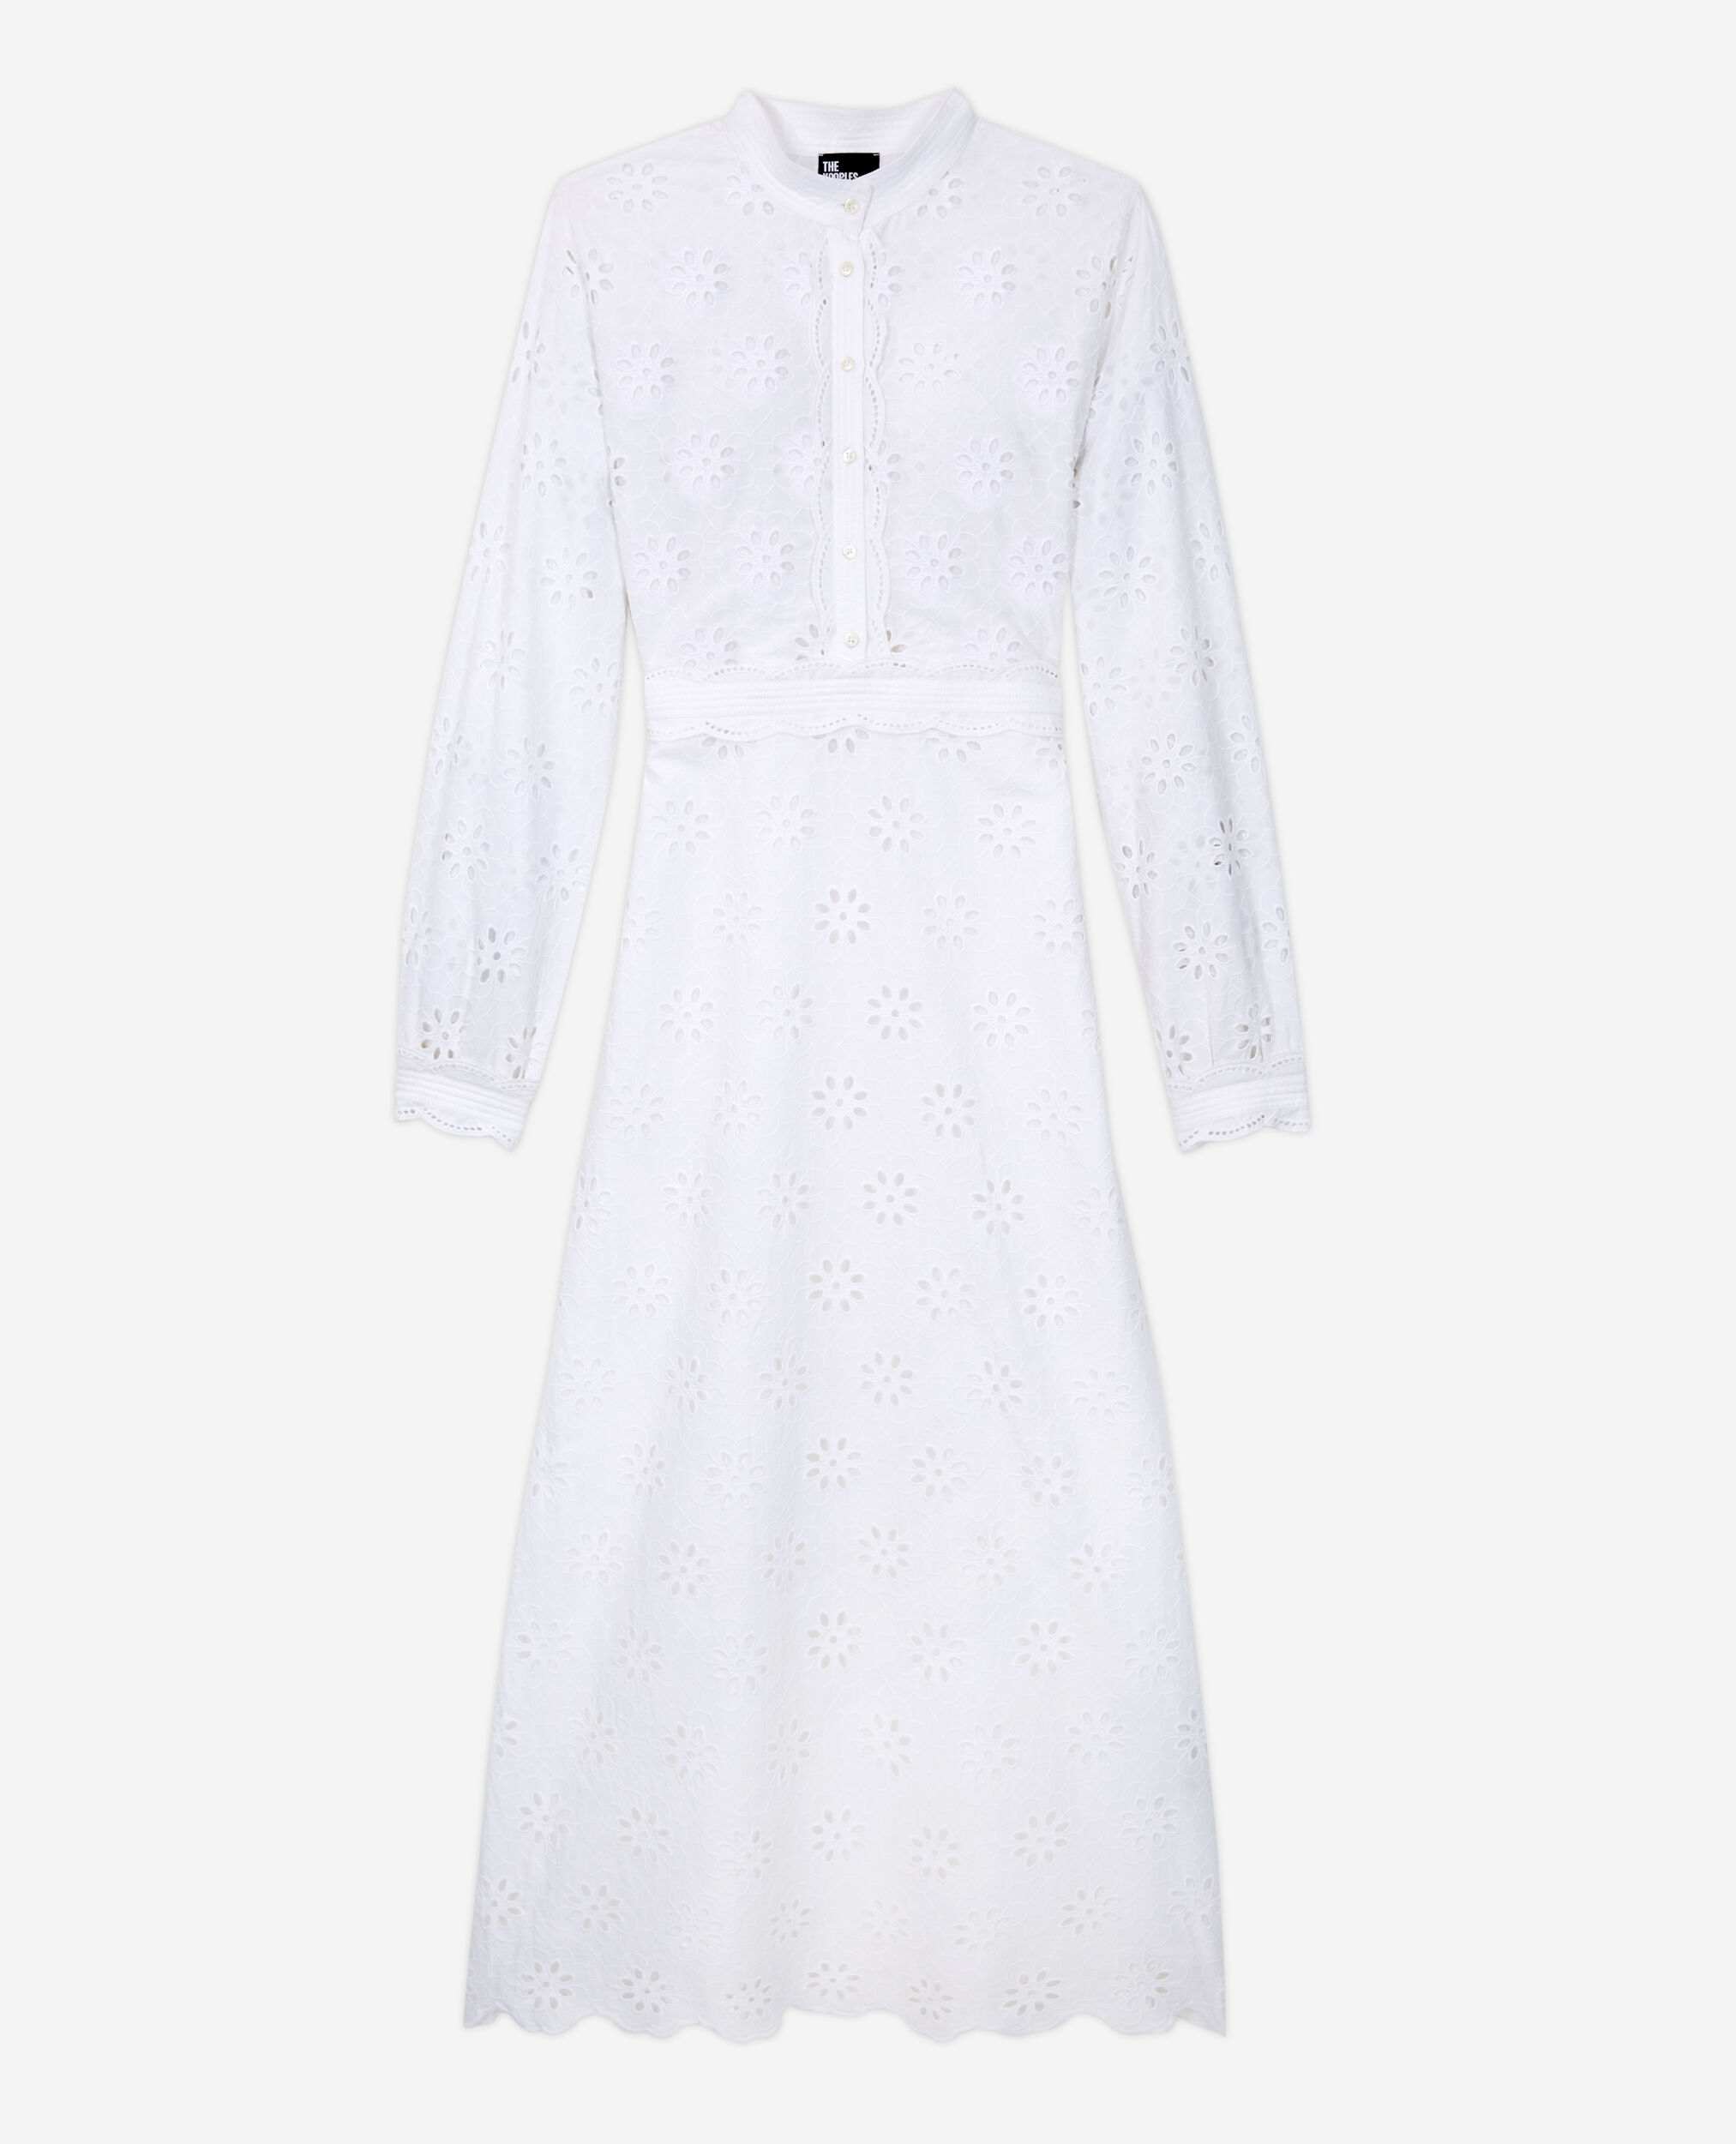 Robe longue blanche en broderie Anglaise, WHITE, hi-res image number null